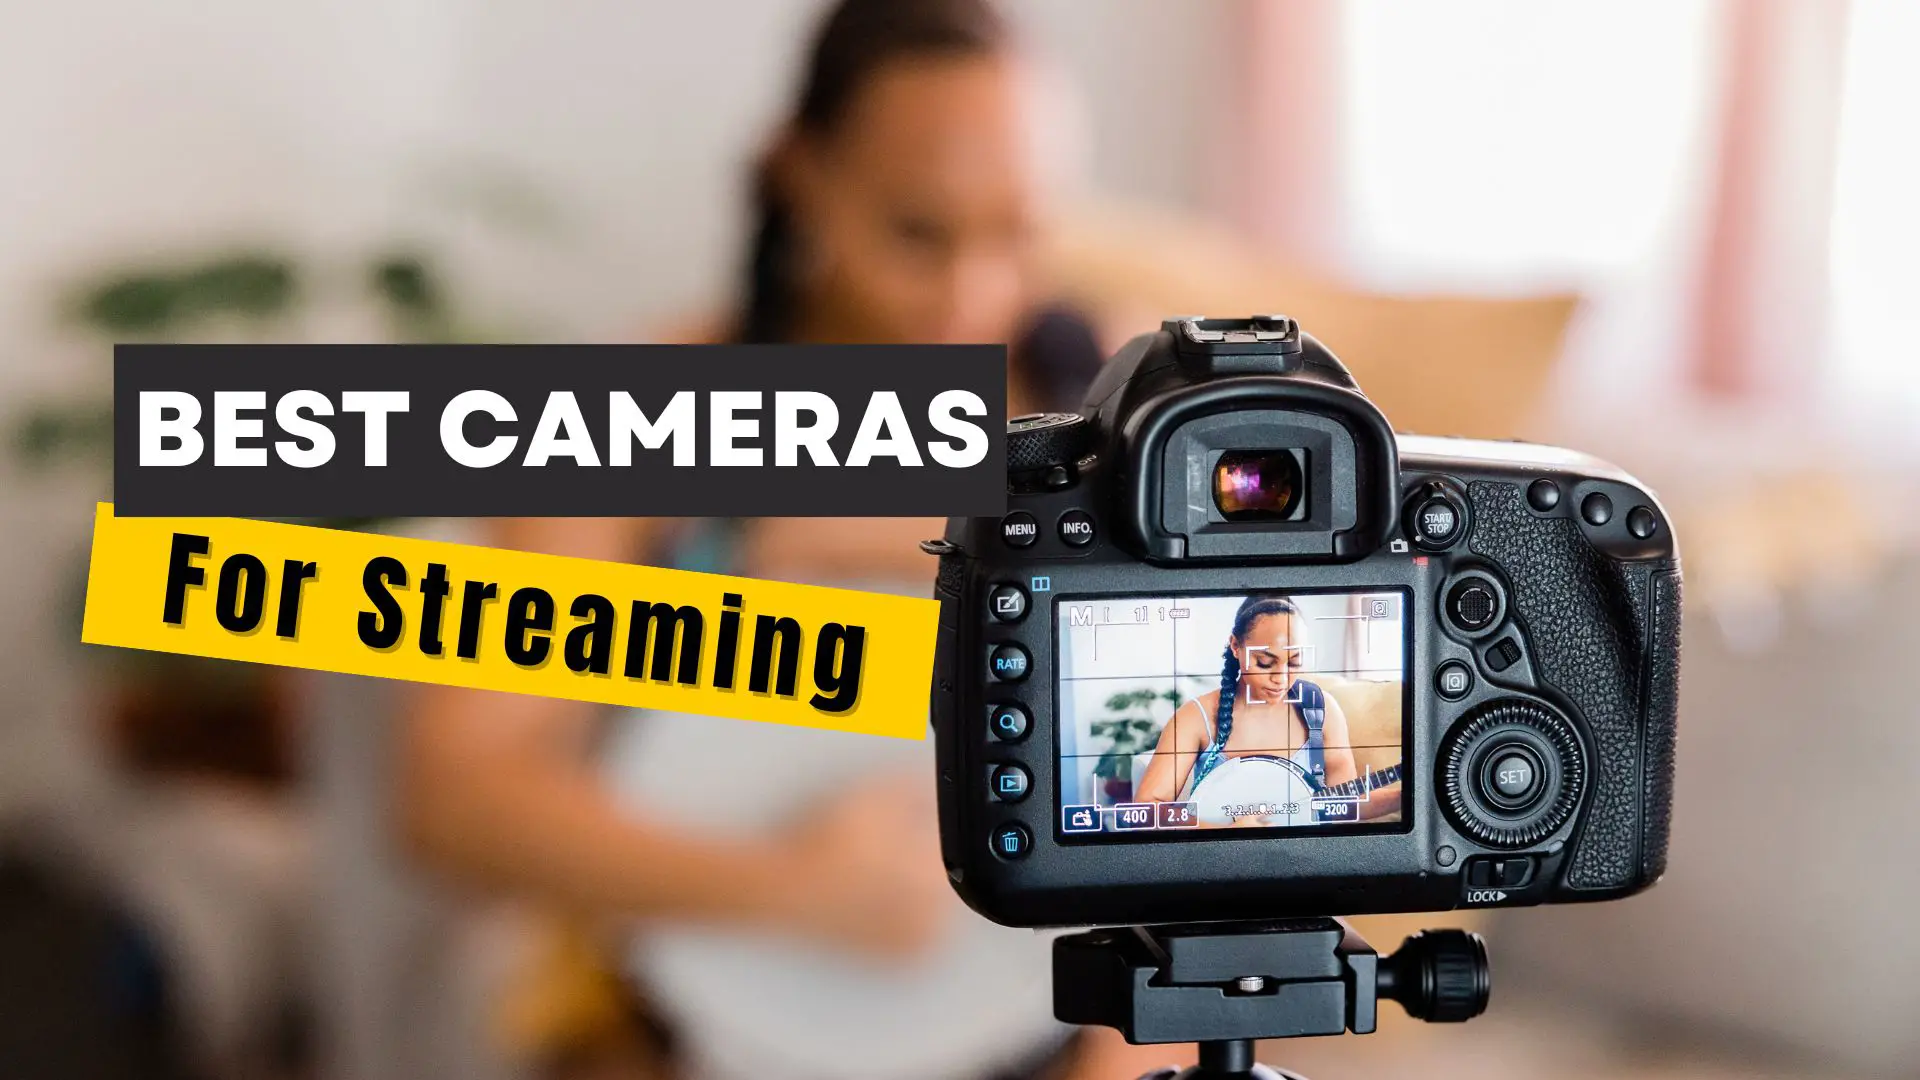 Best Cameras for Streaming